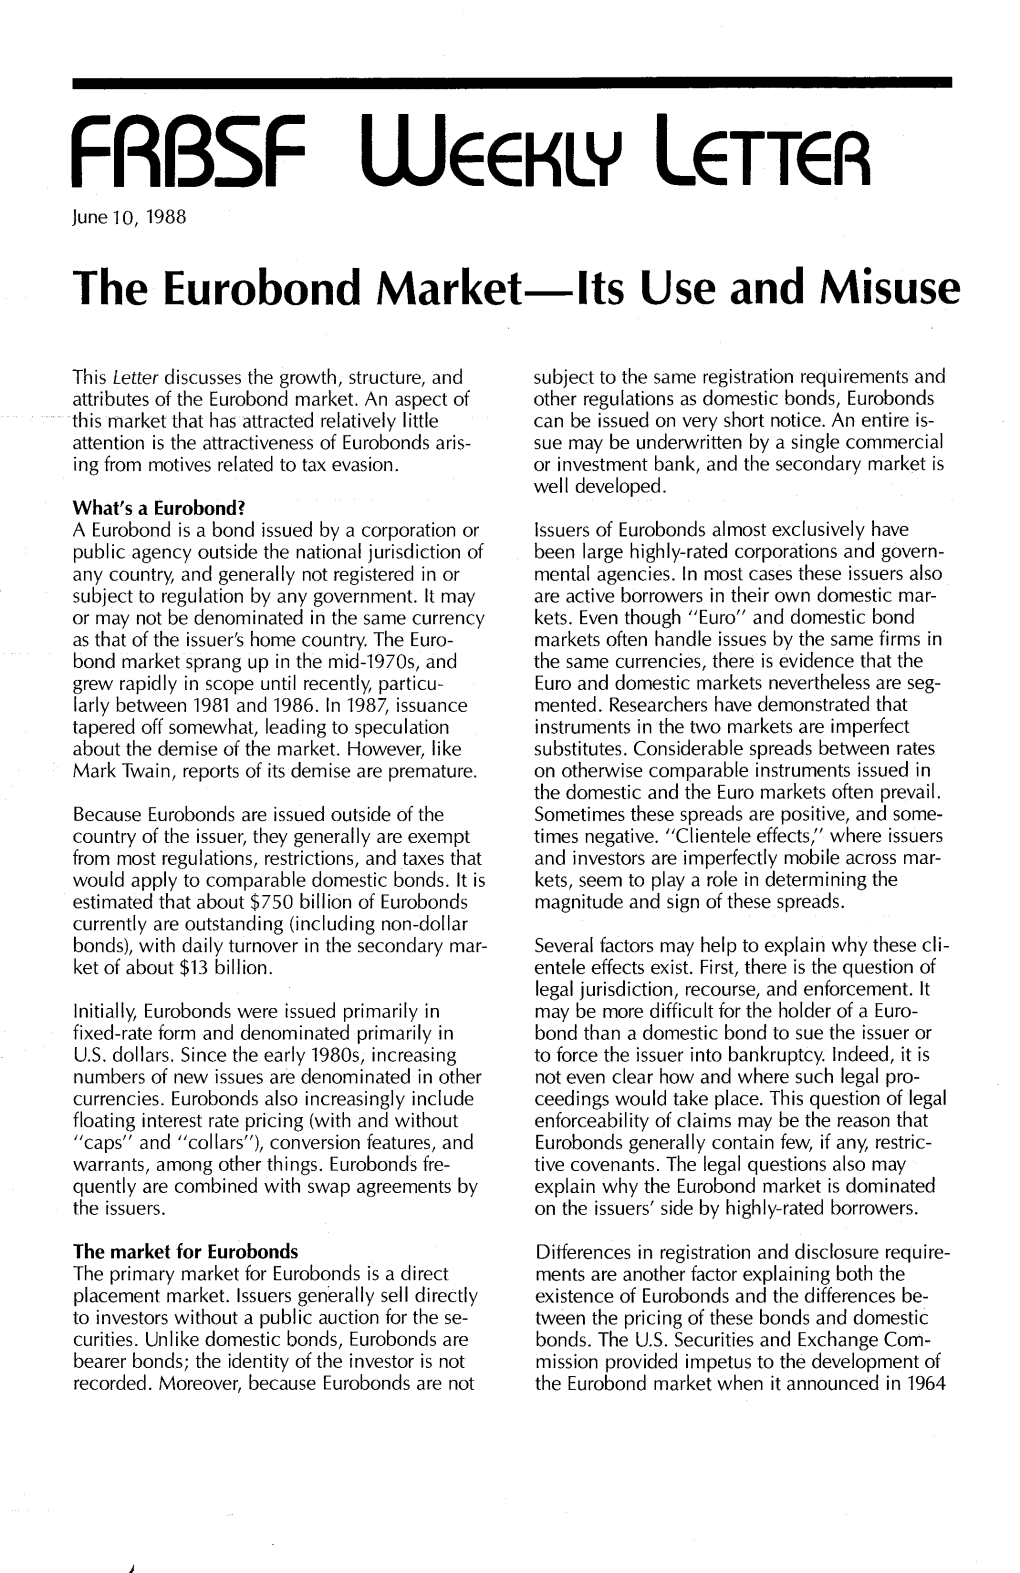 The Eurobond Market-Its Use and Misuse